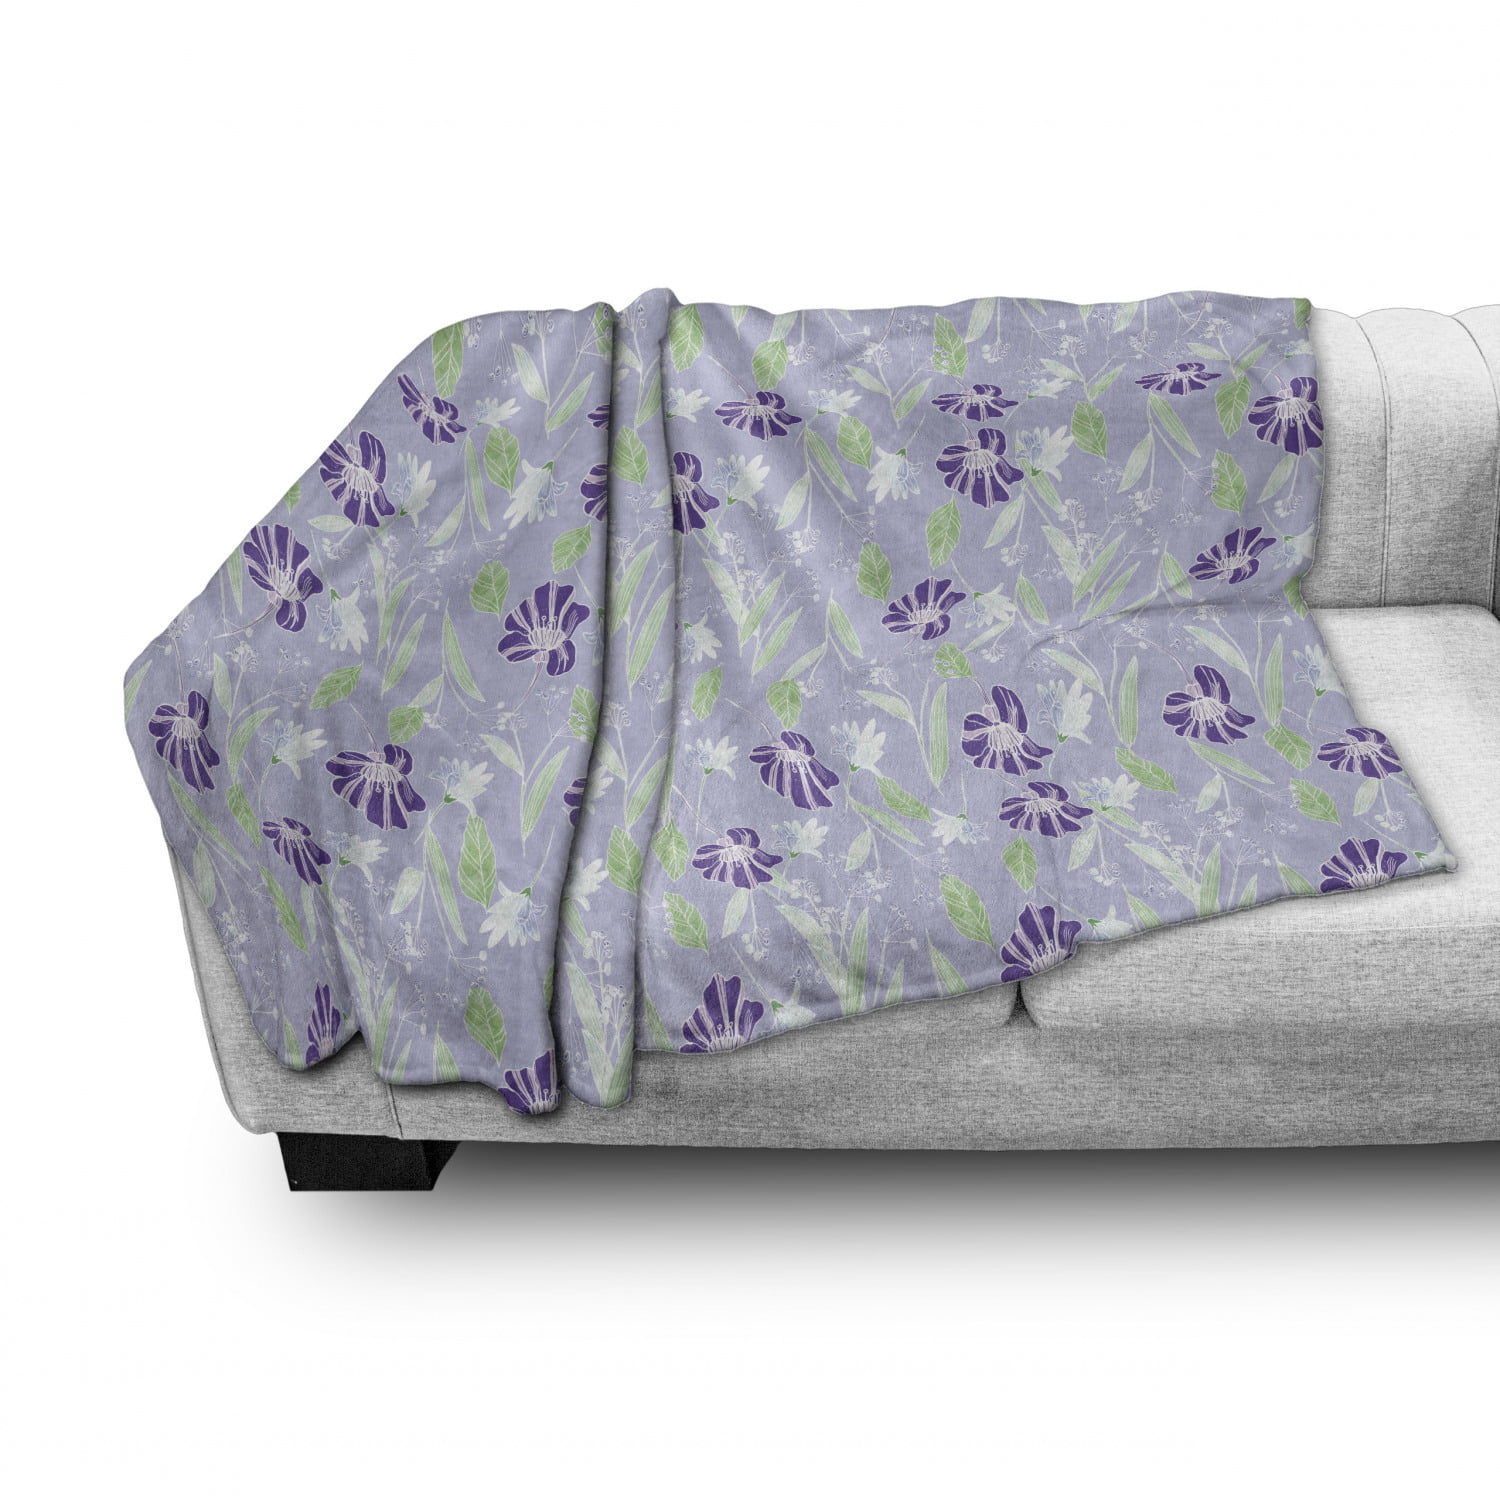 Lilac Tones Peduncles Hand Picked Flowers Sketch Style Pattern 50 x 60 Cozy Plush for Indoor and Outdoor Use Ambesonne Floral Soft Flannel Fleece Throw Blanket Ceil Blue Multicolor